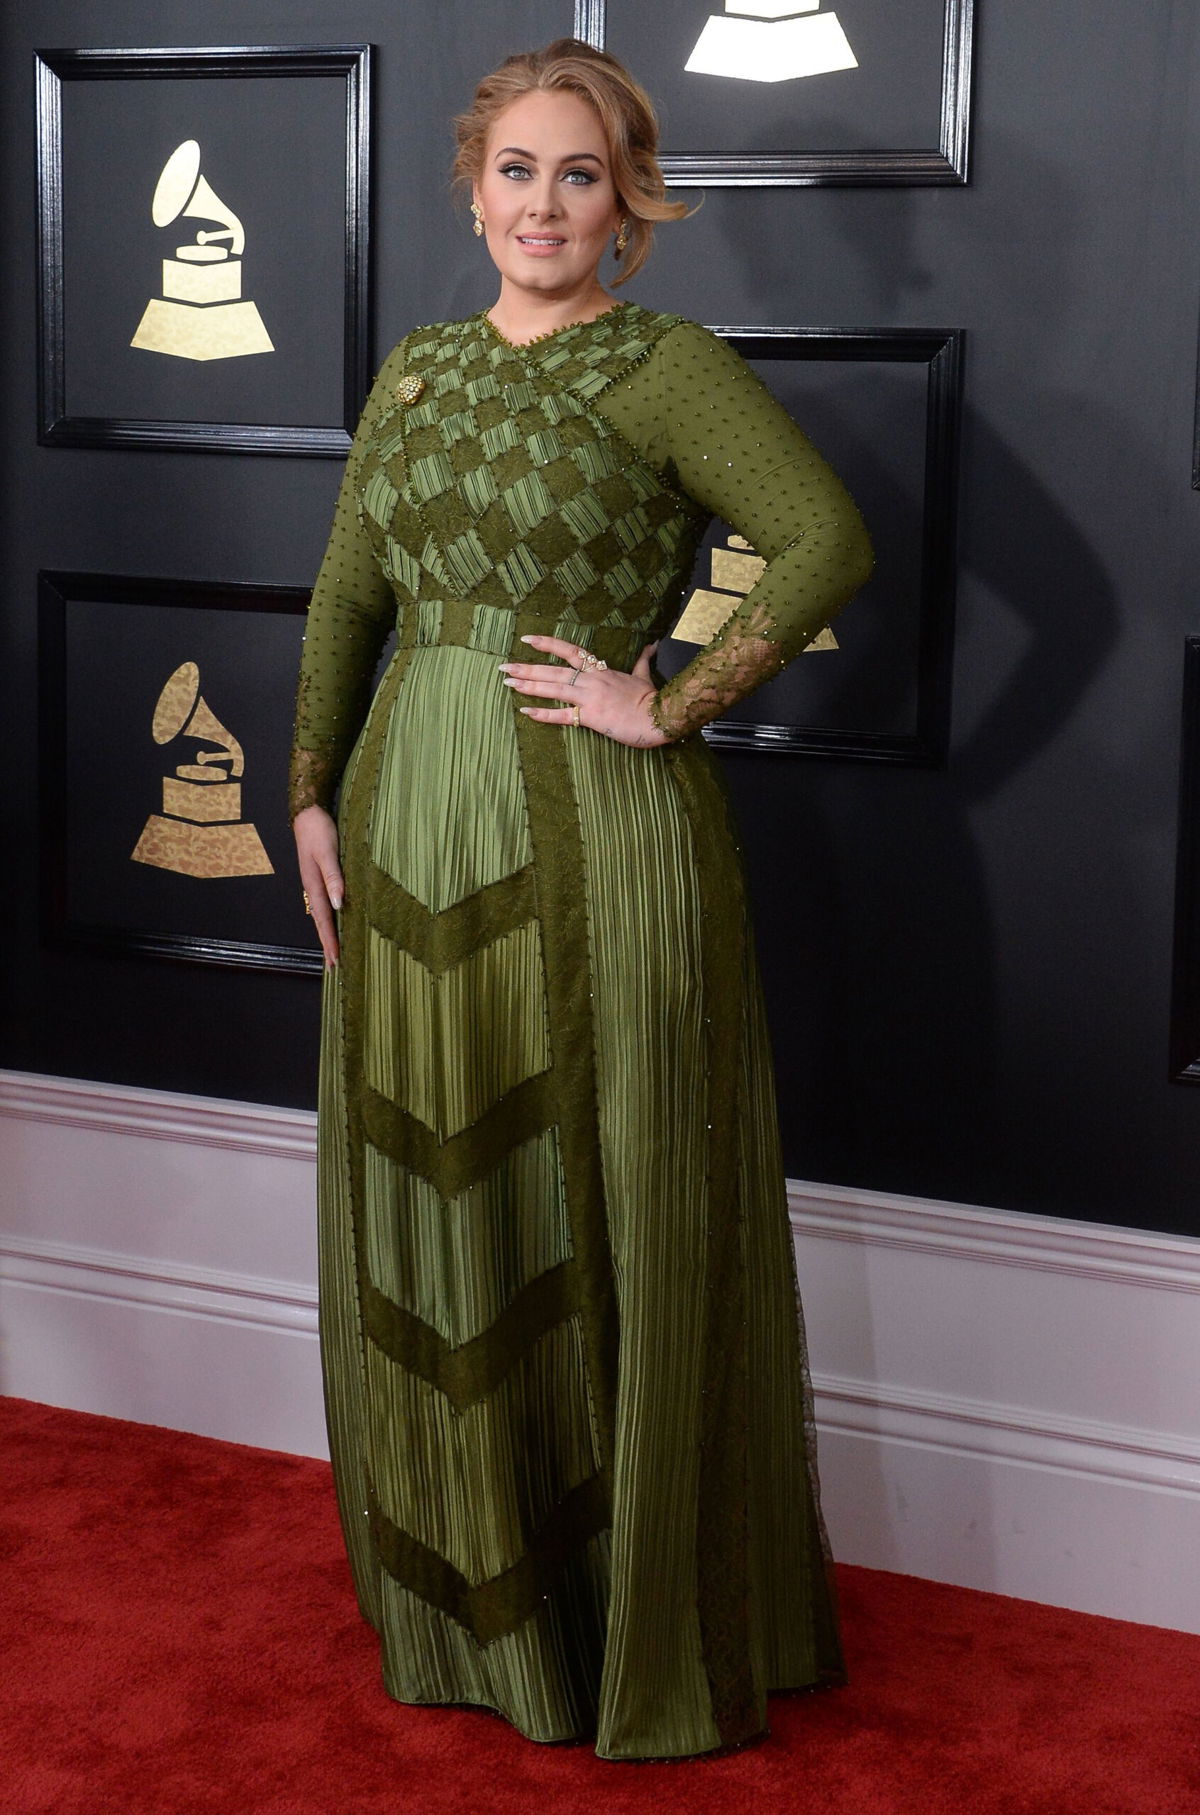 <i>Jim Ruymen/UPI/Shutterstock</i><br/>Adele is opening up about making her upcoming album and finding happiness. The singer is shown here at the 59th annual Grammy Awards held at Staples Center in Los Angeles on February 12